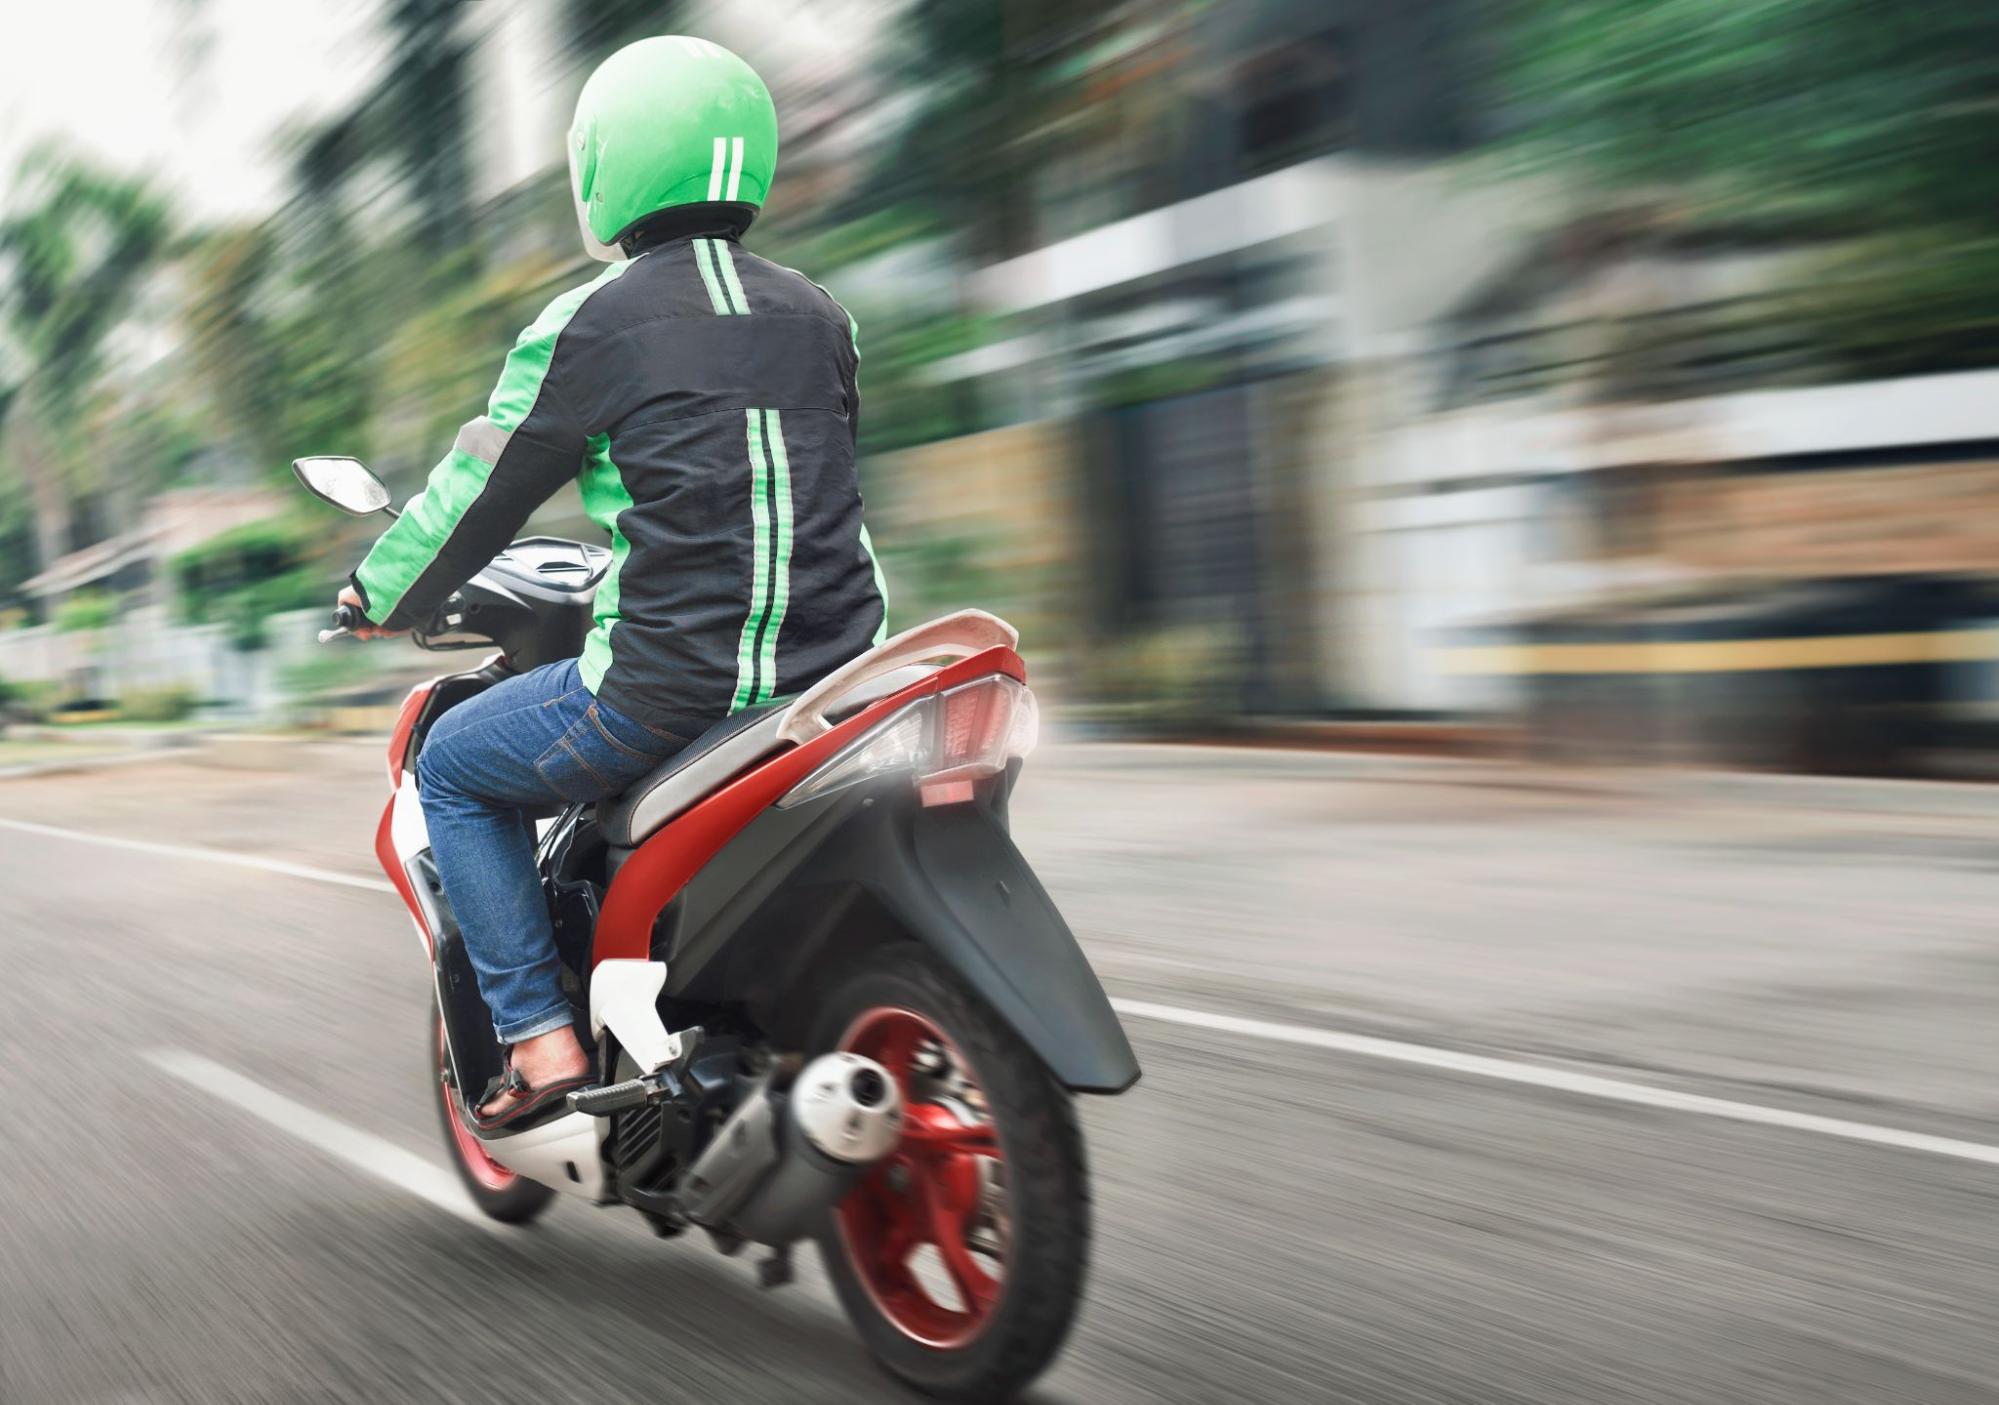 Take a peek at 13 advantages and disadvantages of electric motorbikes before buying one